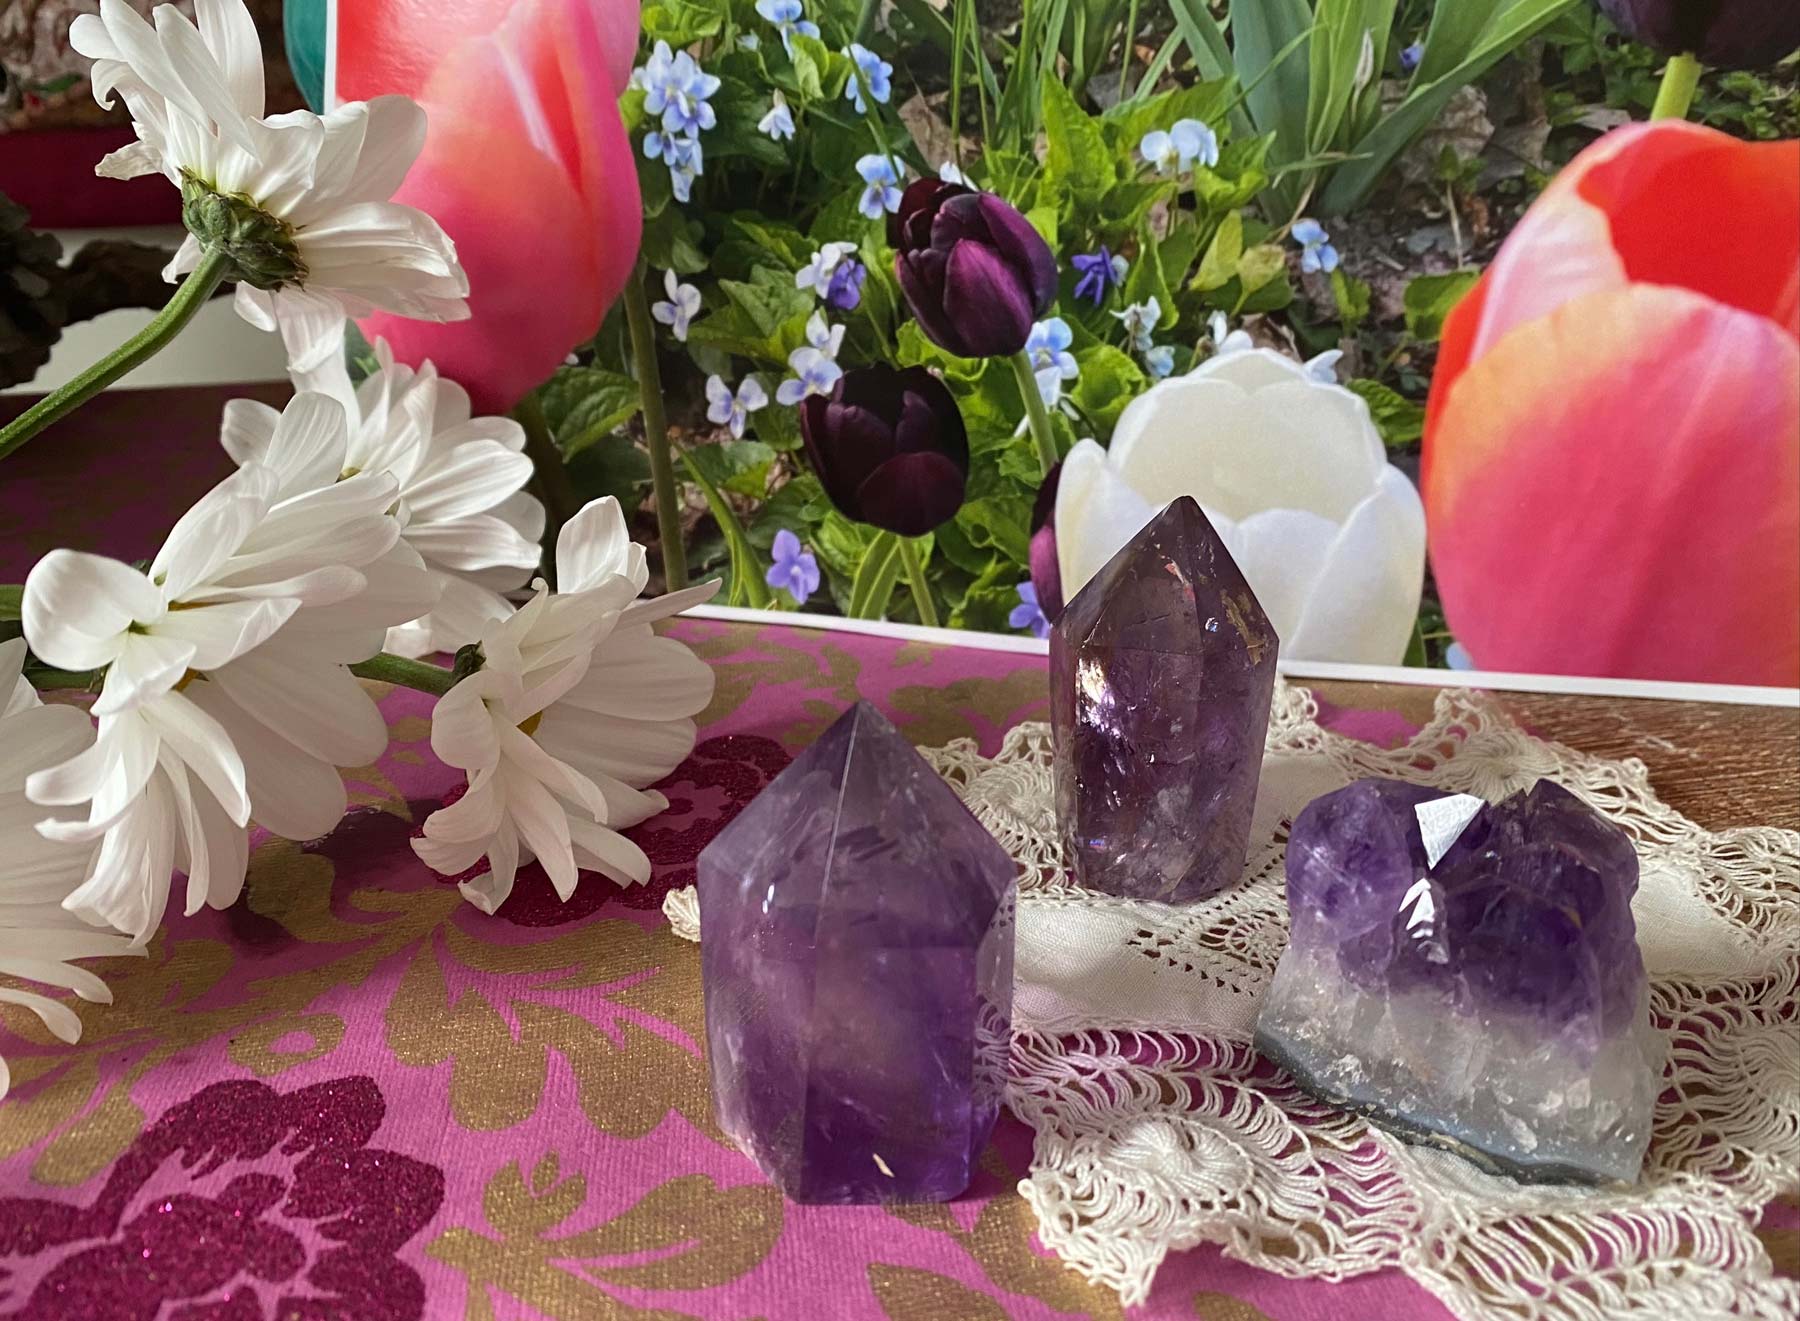 Amethyst crystals, daisies, and tulips